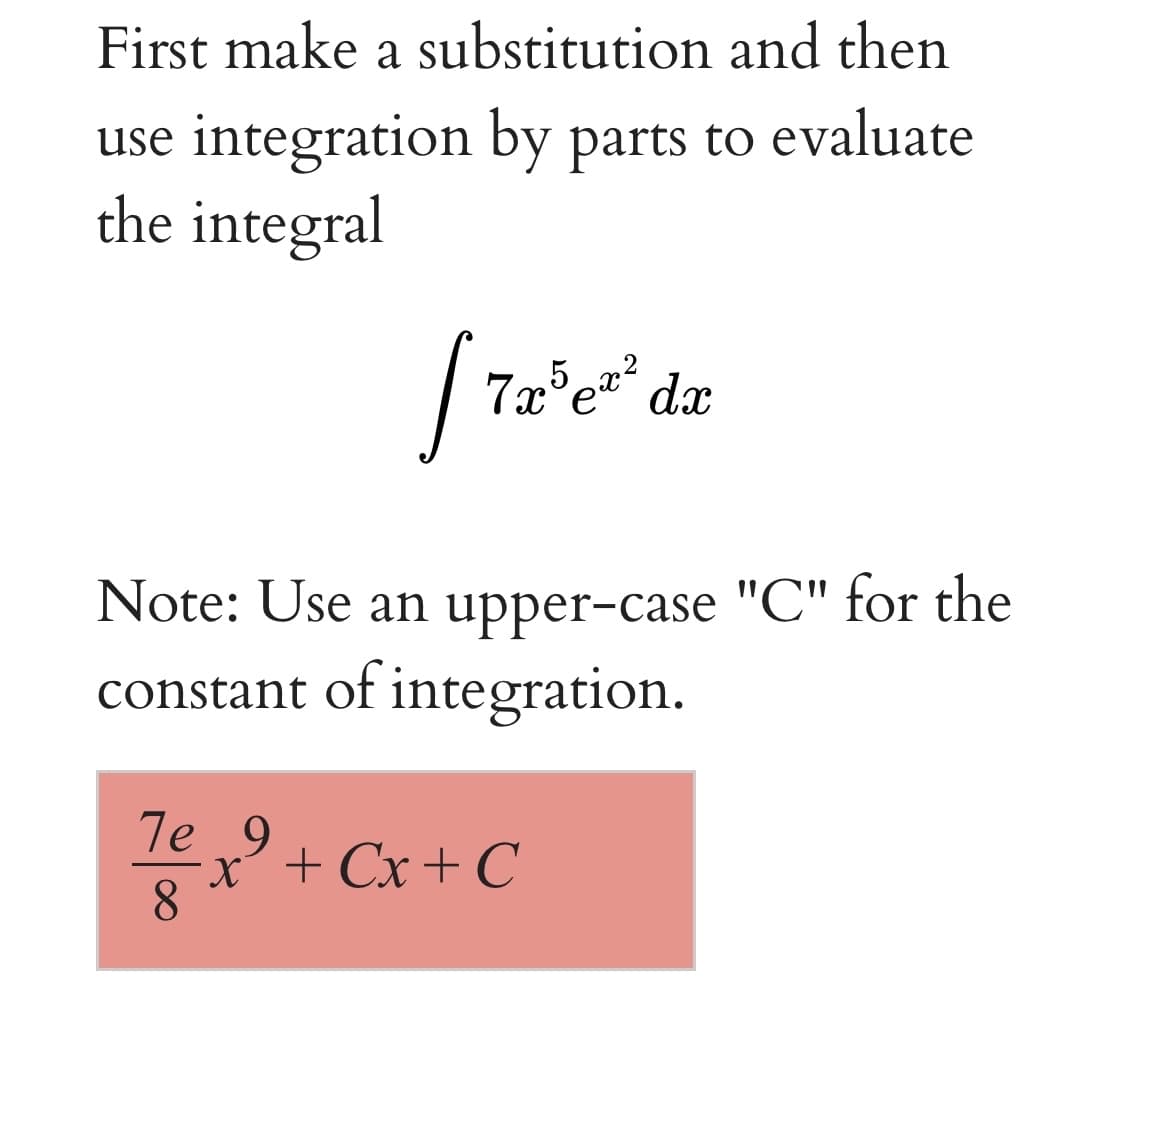 First make a substitution and then
use integration by parts to evaluate
the integral
7x°e" dx
Note: Use an upper-case "C" for the
constant of integration.
T
7e 9
x + Cx+ C
8
